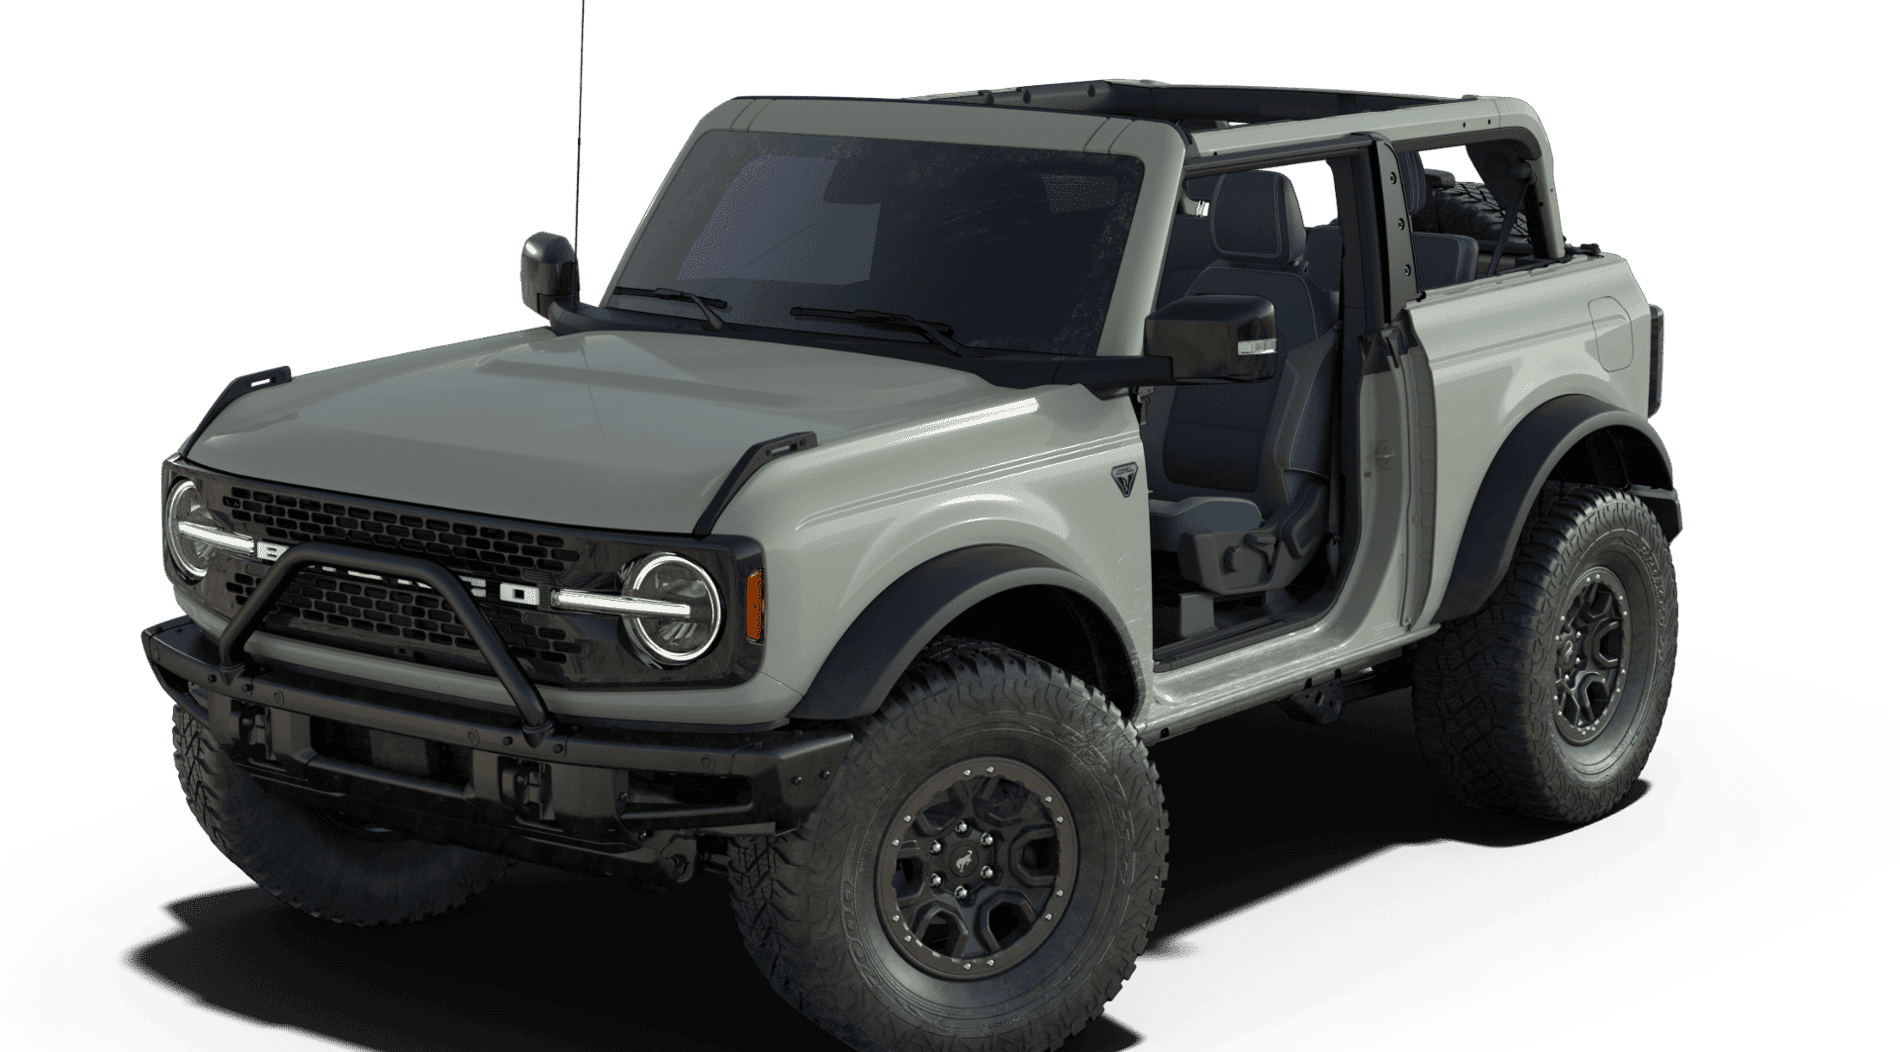 Production Wildtrak and Badlands Broncos Will Share Grille But In